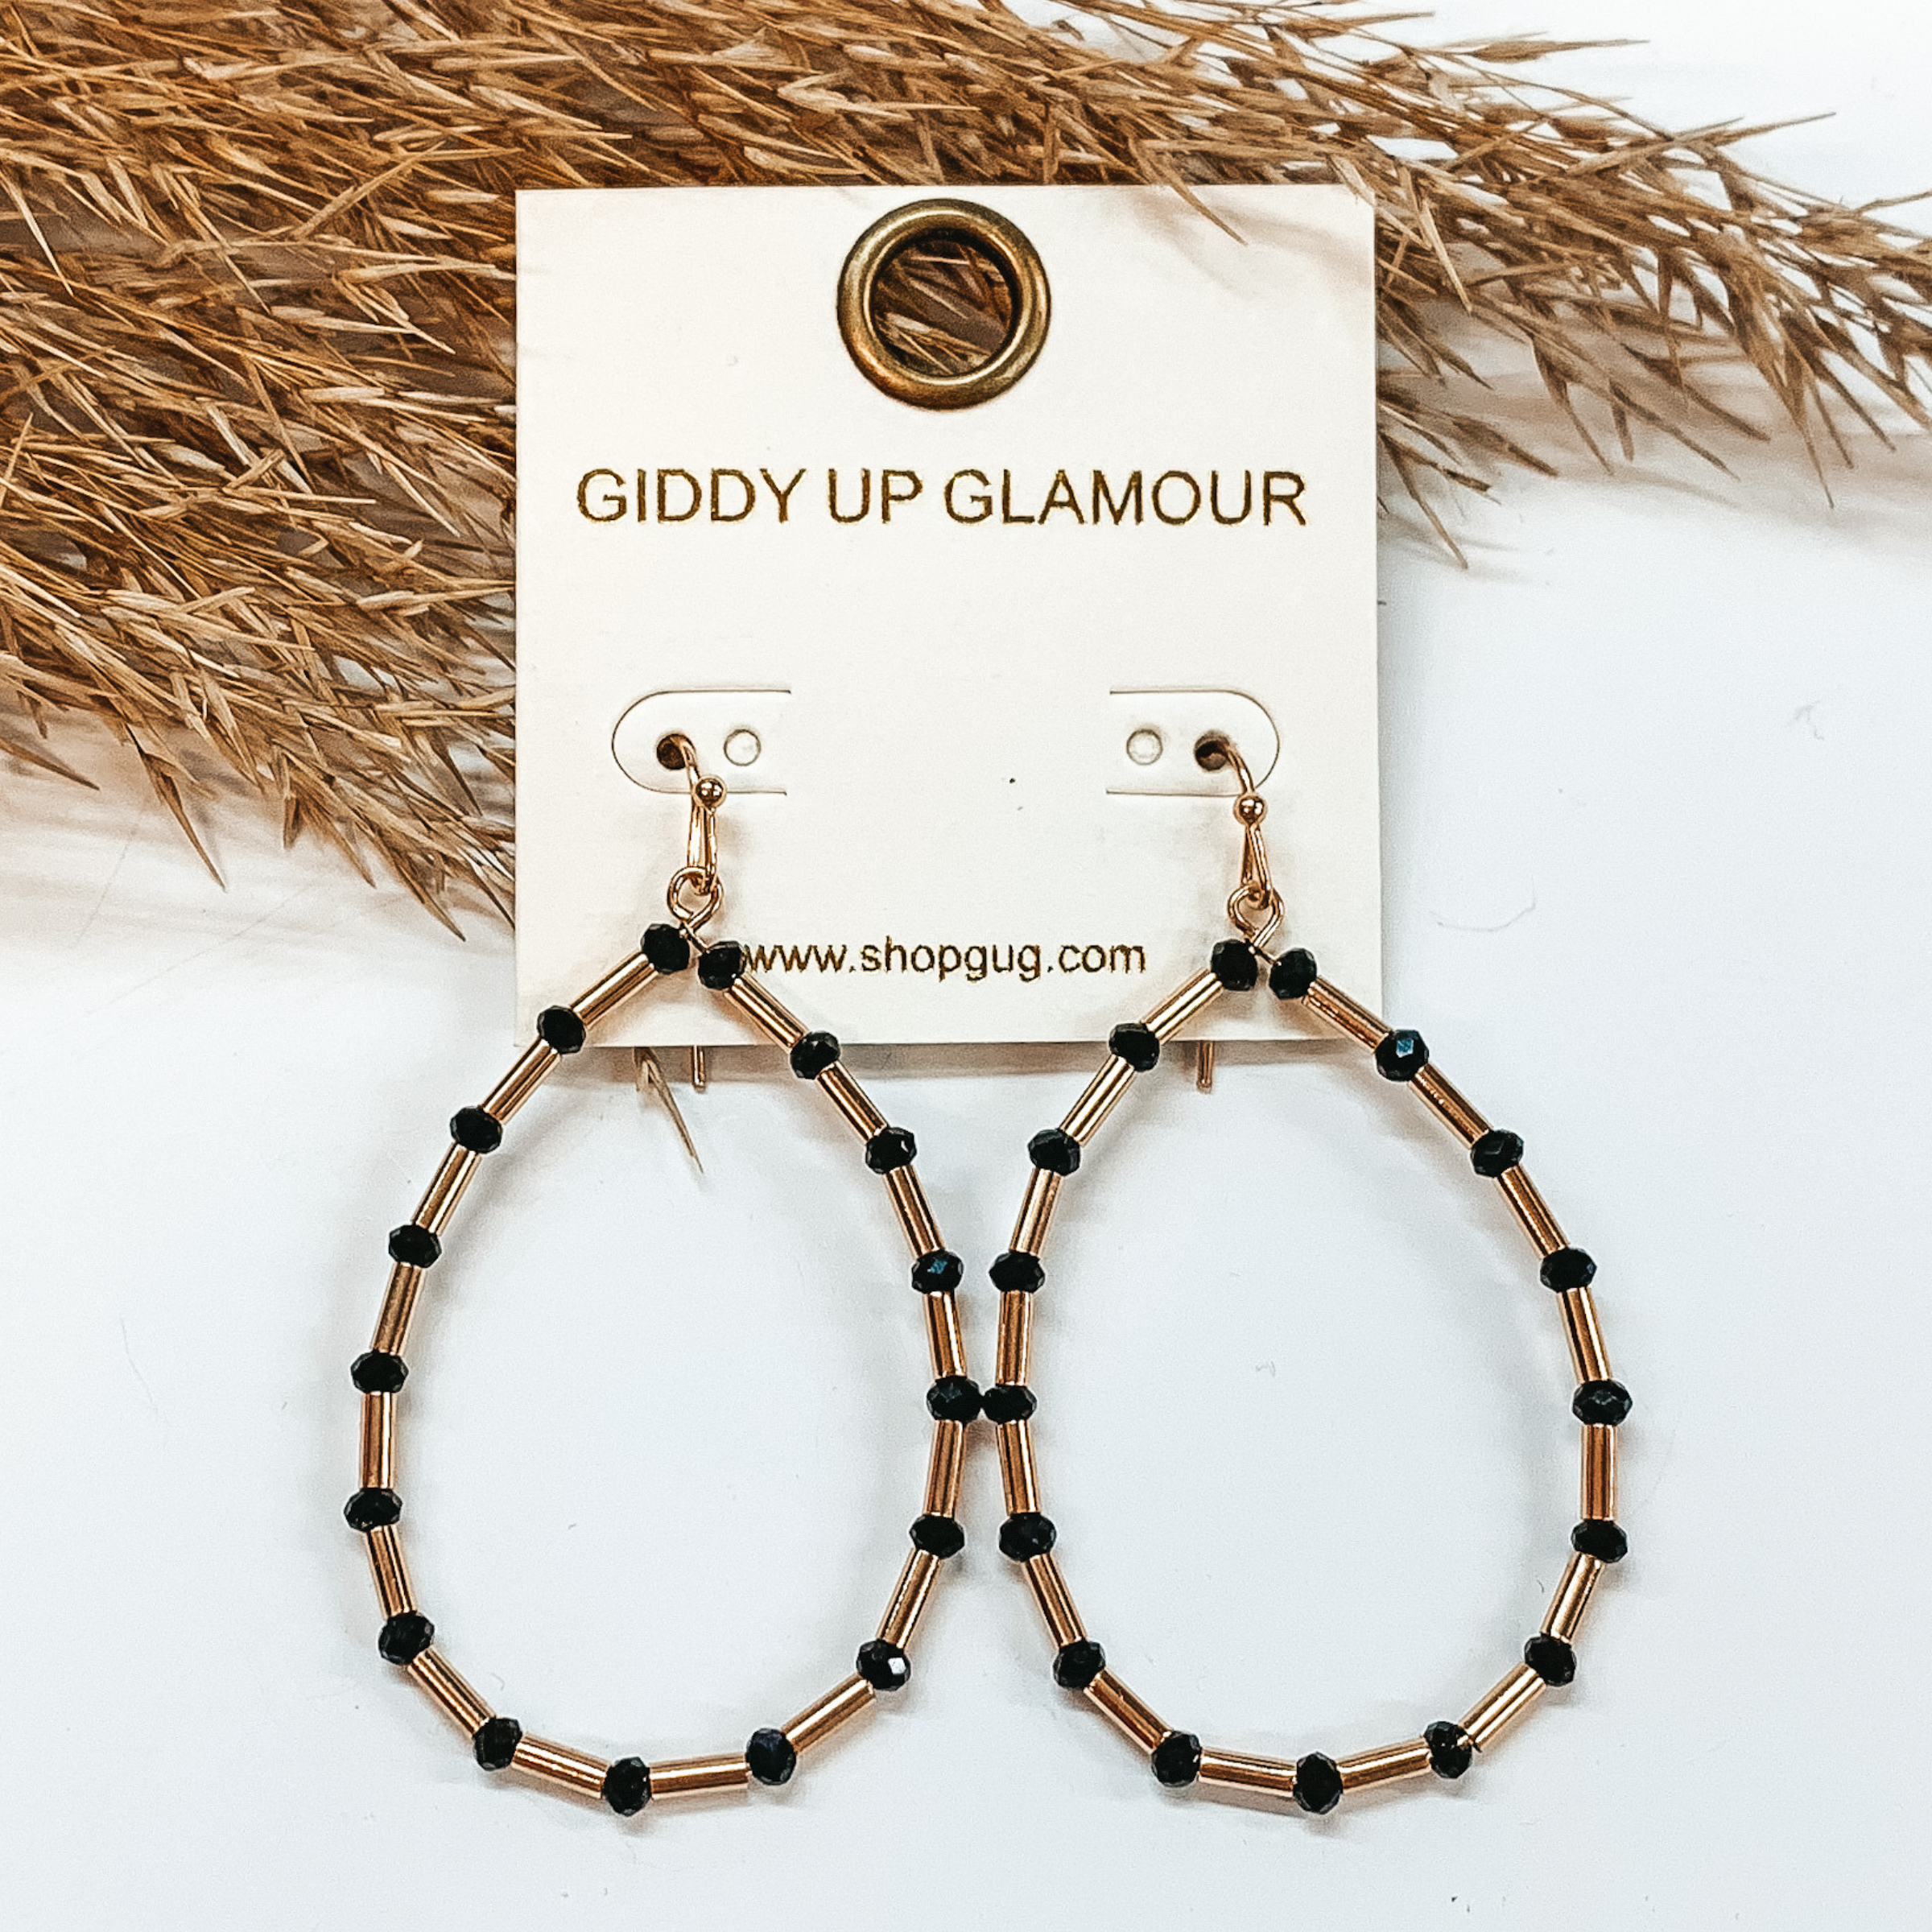 Teardrop earrings with long gold beads and black beads. Taken in a white  background with a brown plant as decor.